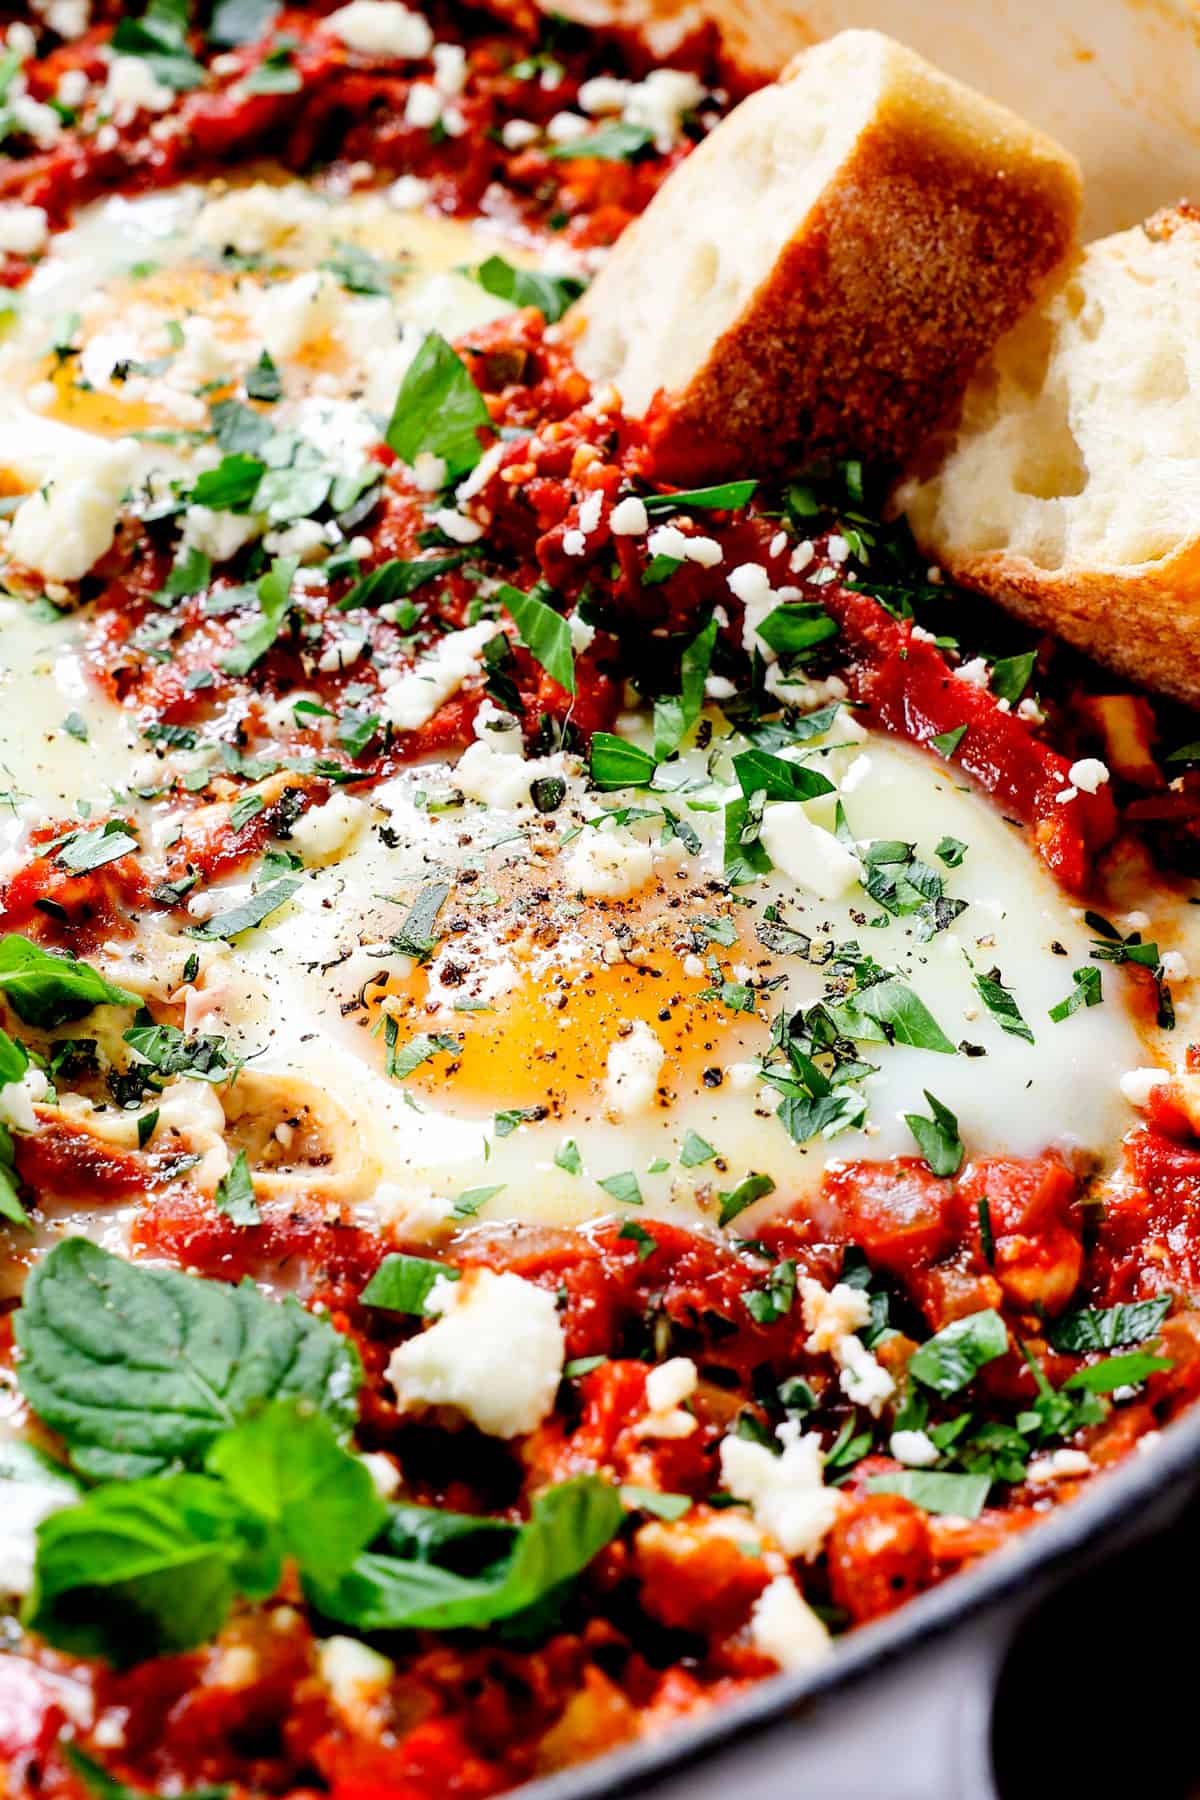 up close of egg shakshuka showing the sunny poached eggs